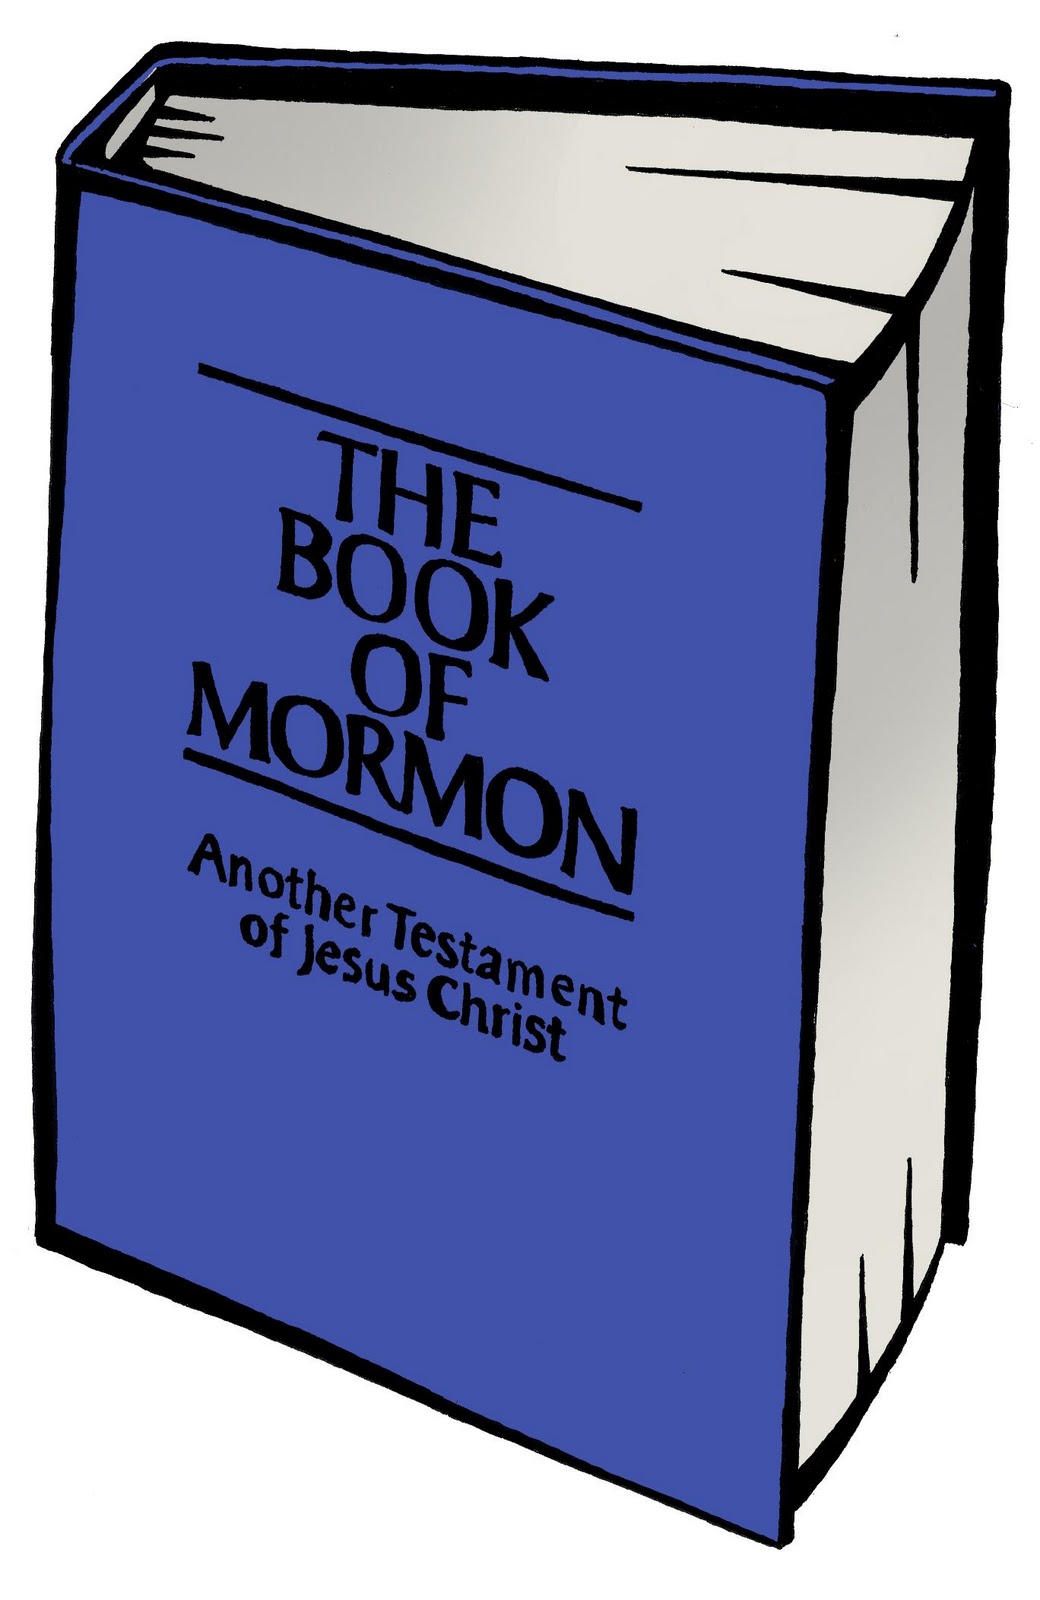 LDS Book Of Mormon Study Guide drawing free image download